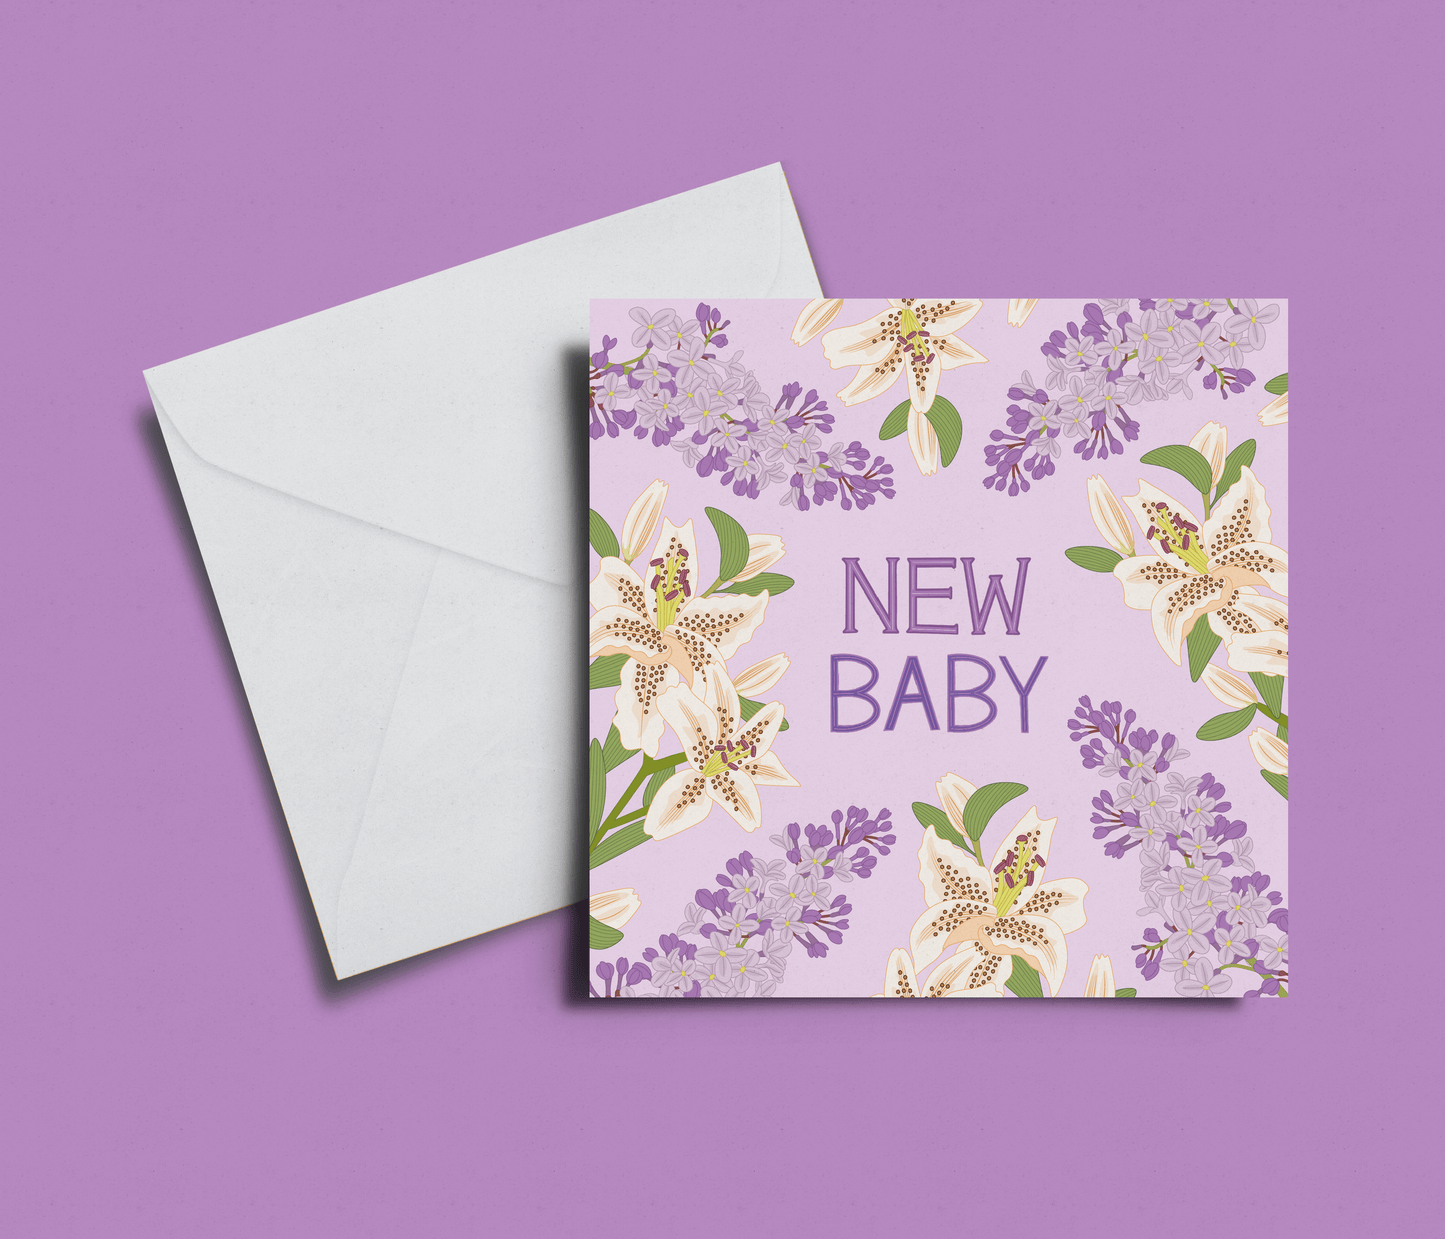 'New Baby' Lilies Card